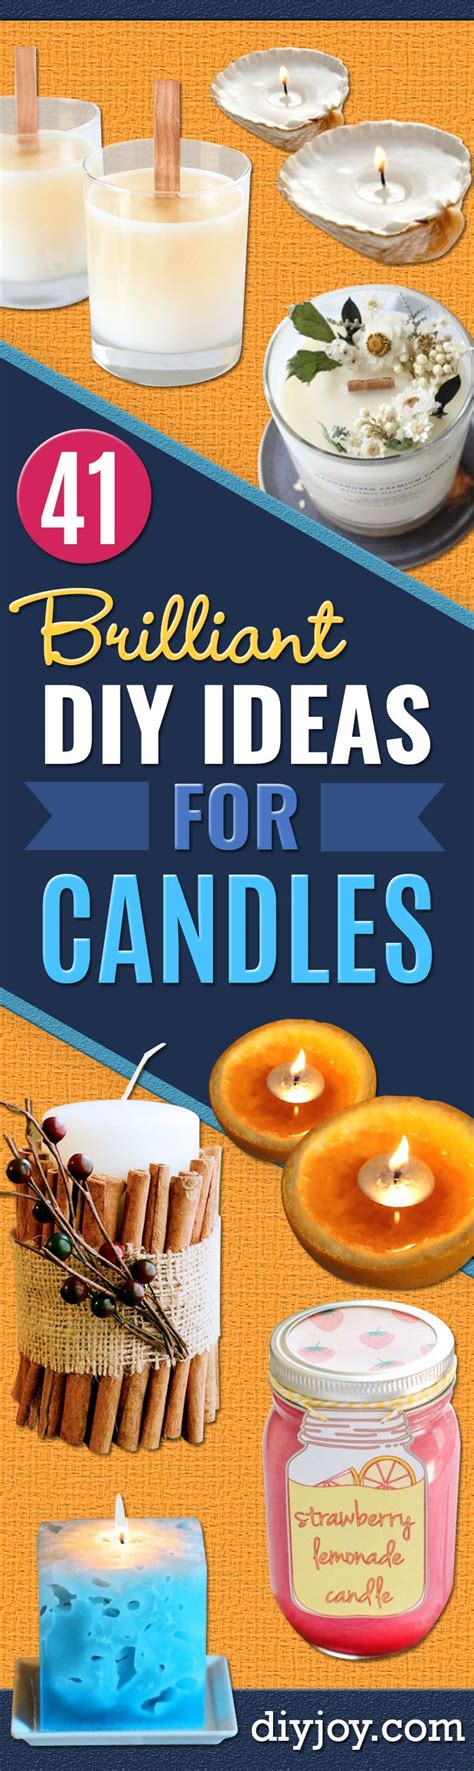 41 Brilliant Diy Ideas For Candles With Images Dollar Store Candle